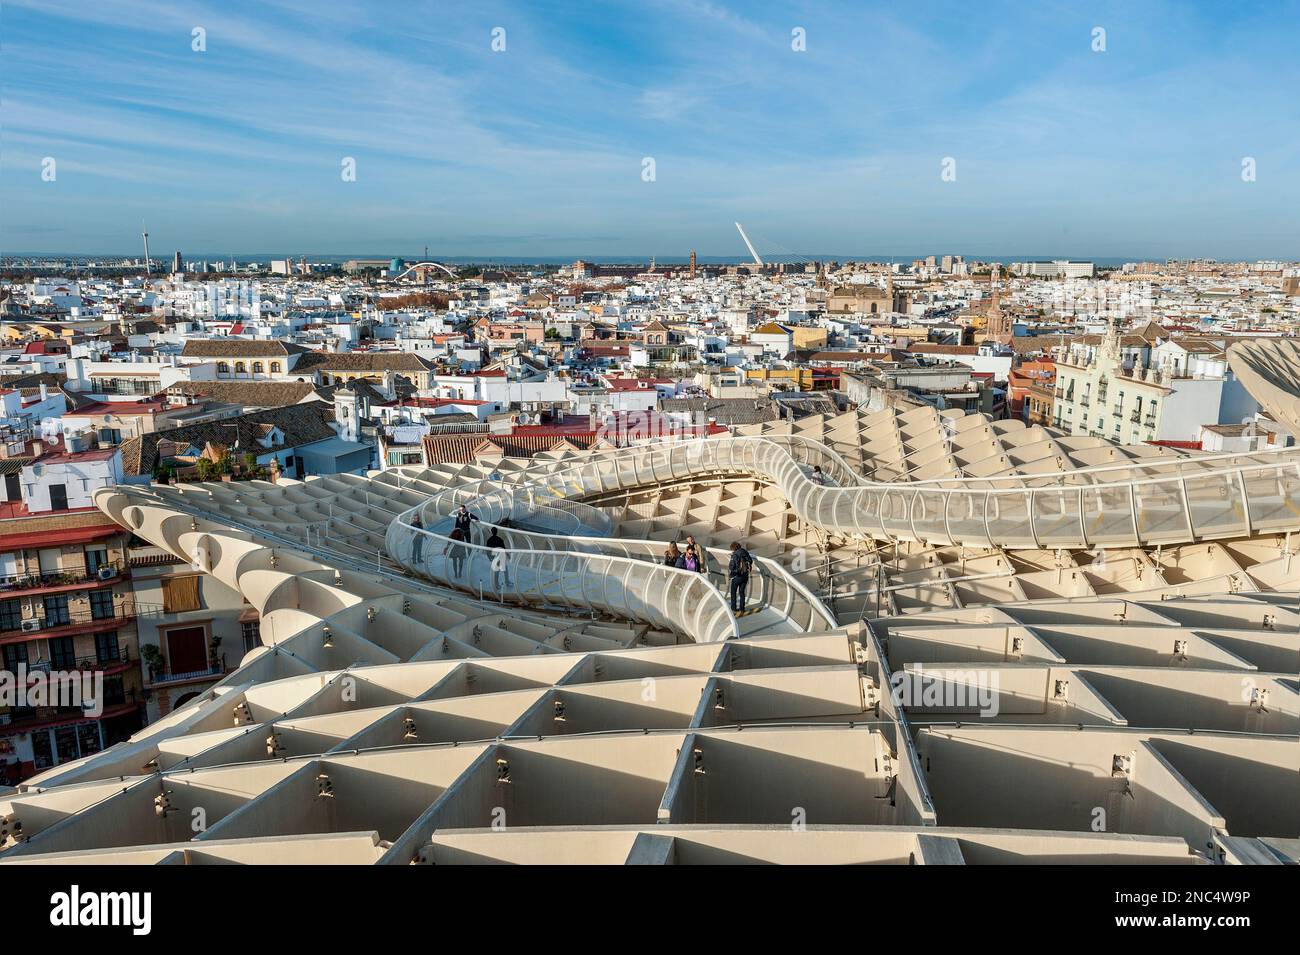 Seville-Andalusia-Spain, December 12. 2019: Panoramic view of the city Seville and Metropolitan Parasol building. Stock Photo